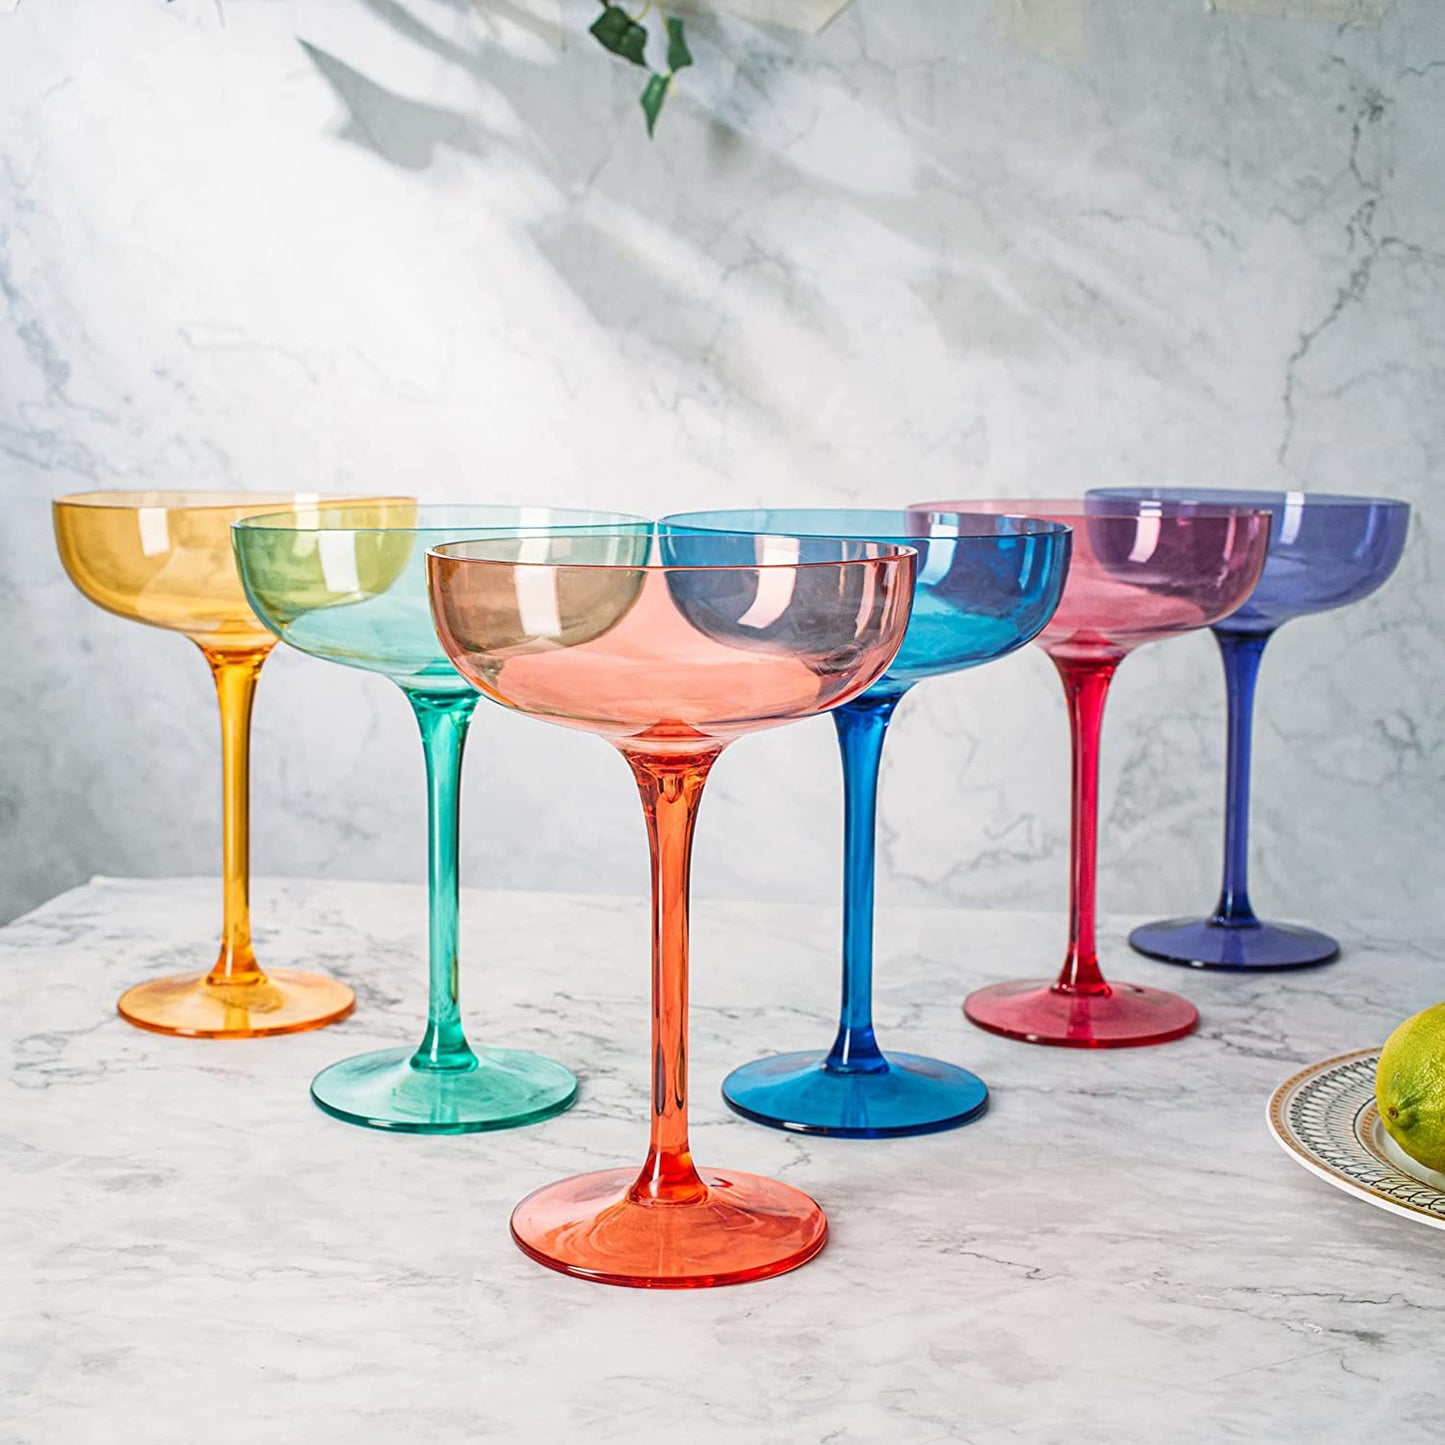 Madrid Coupe Cocktail Glassware, Unbreakable Acrylic, Set of 6